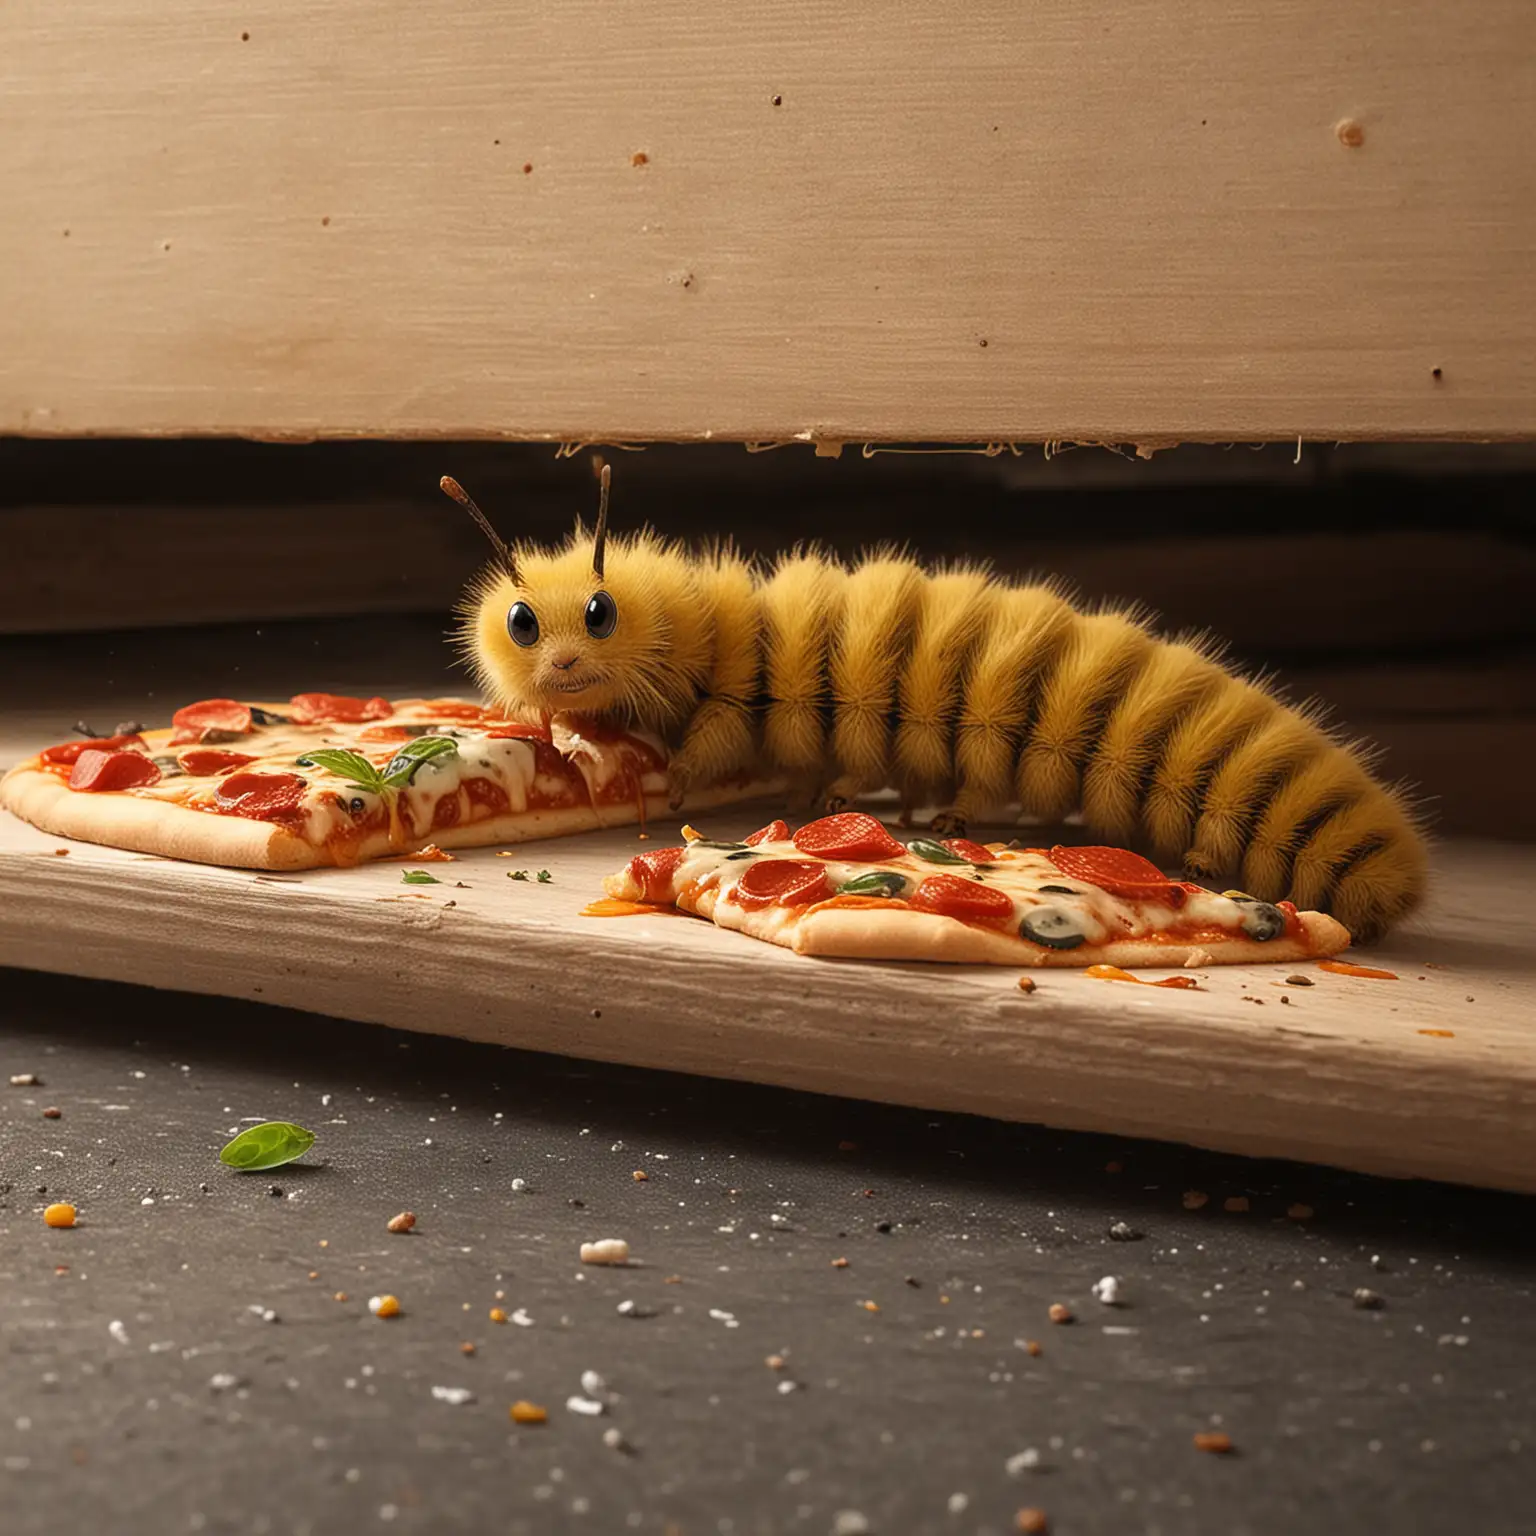 Caterpillar in a kitchen garage can eating pizza